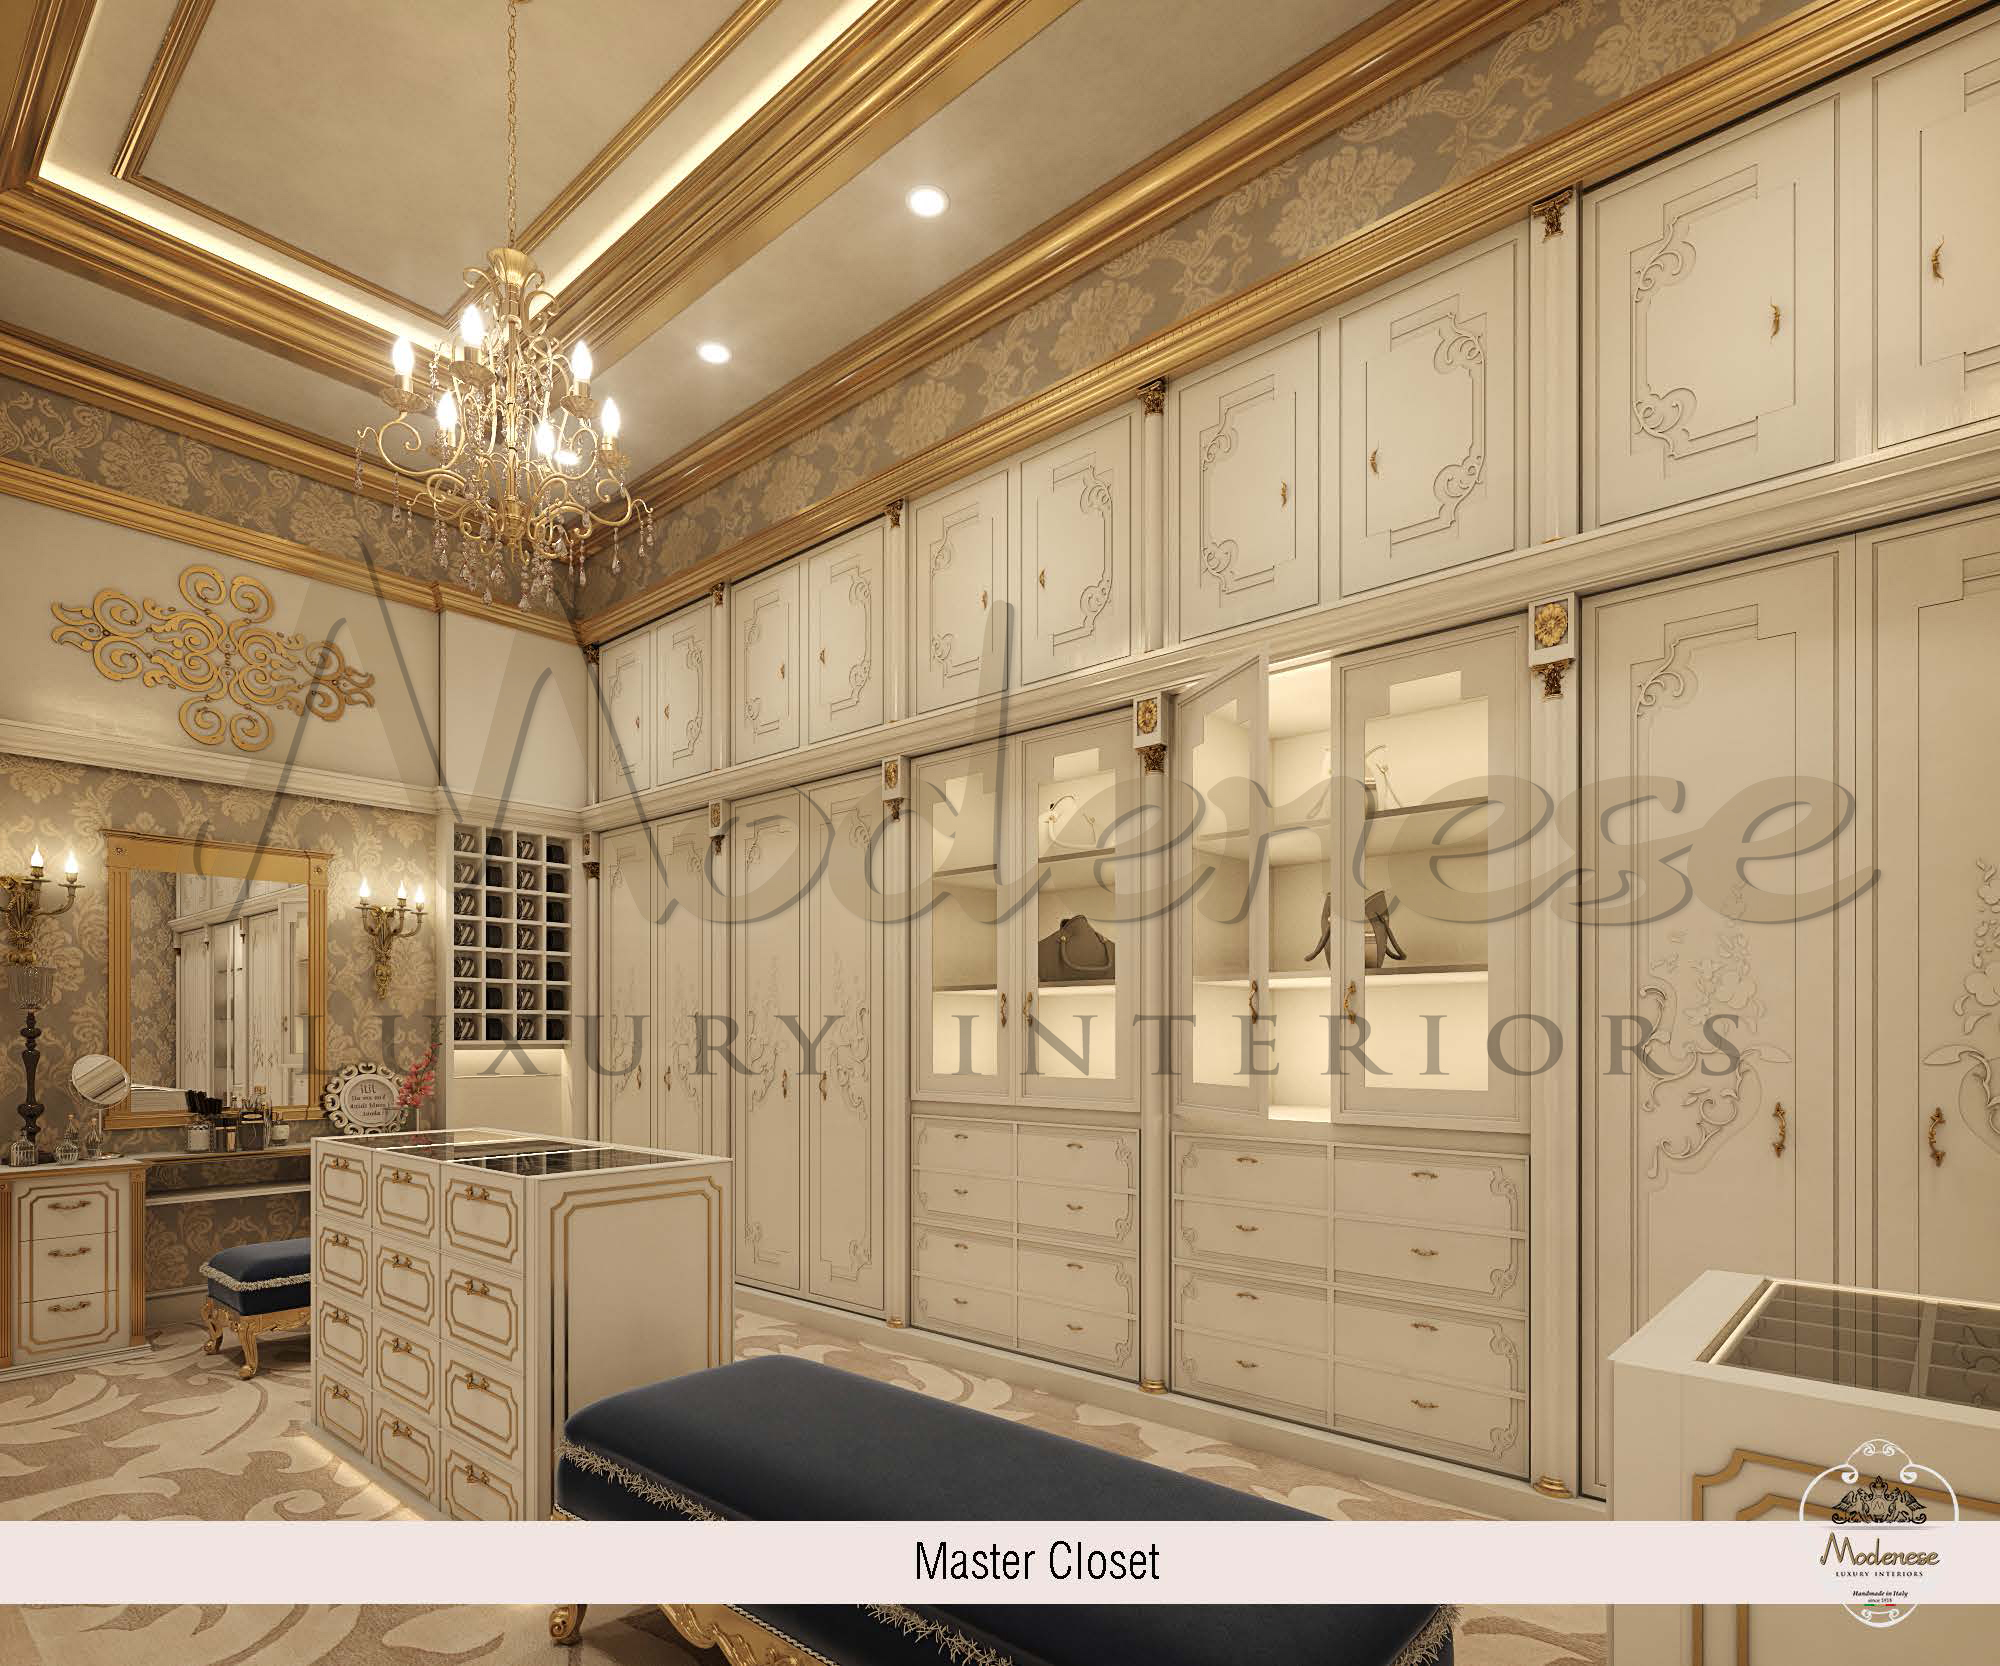 Bespoke refined interior design, high-end materials and best quality furniture for ideal home, luxury walk in closet design. Interior design firms in Abuja.Top interior design companies Abuja